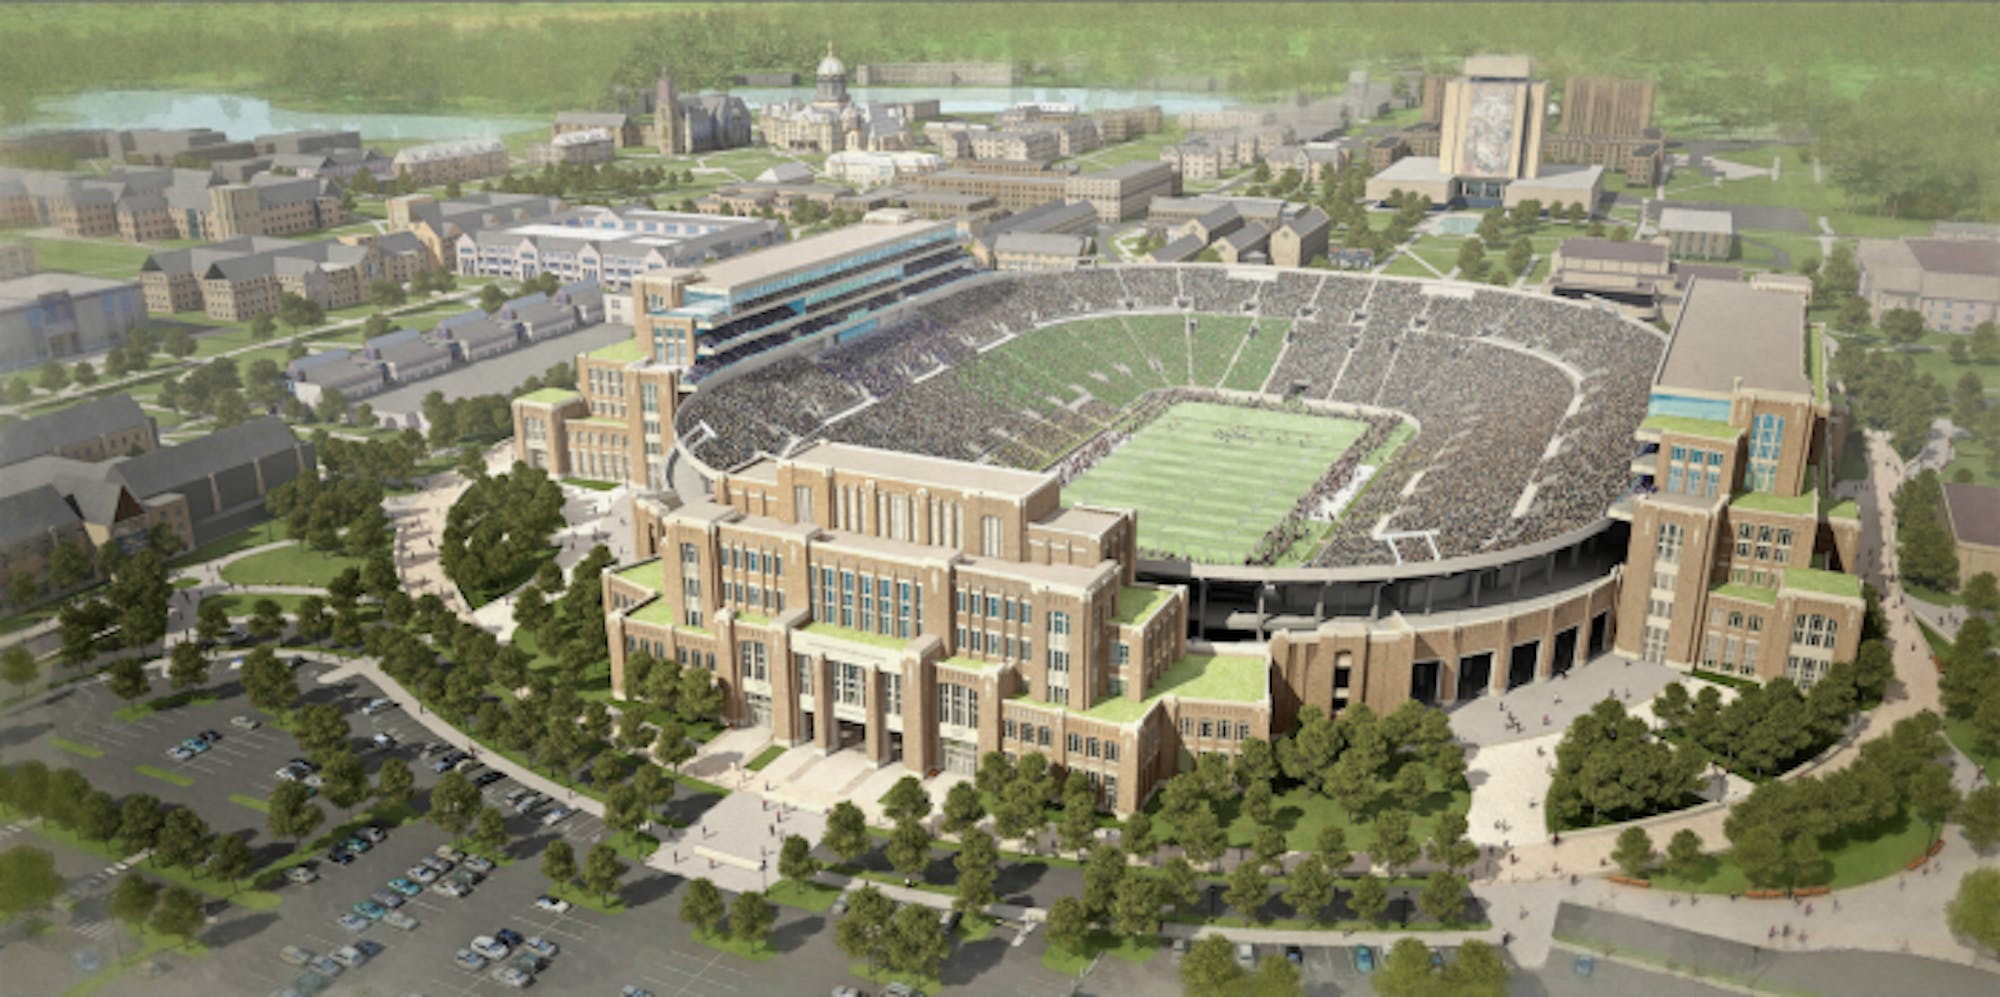 The University announced plans to build three integrated additions to the Stadium as early as winter of 2014.